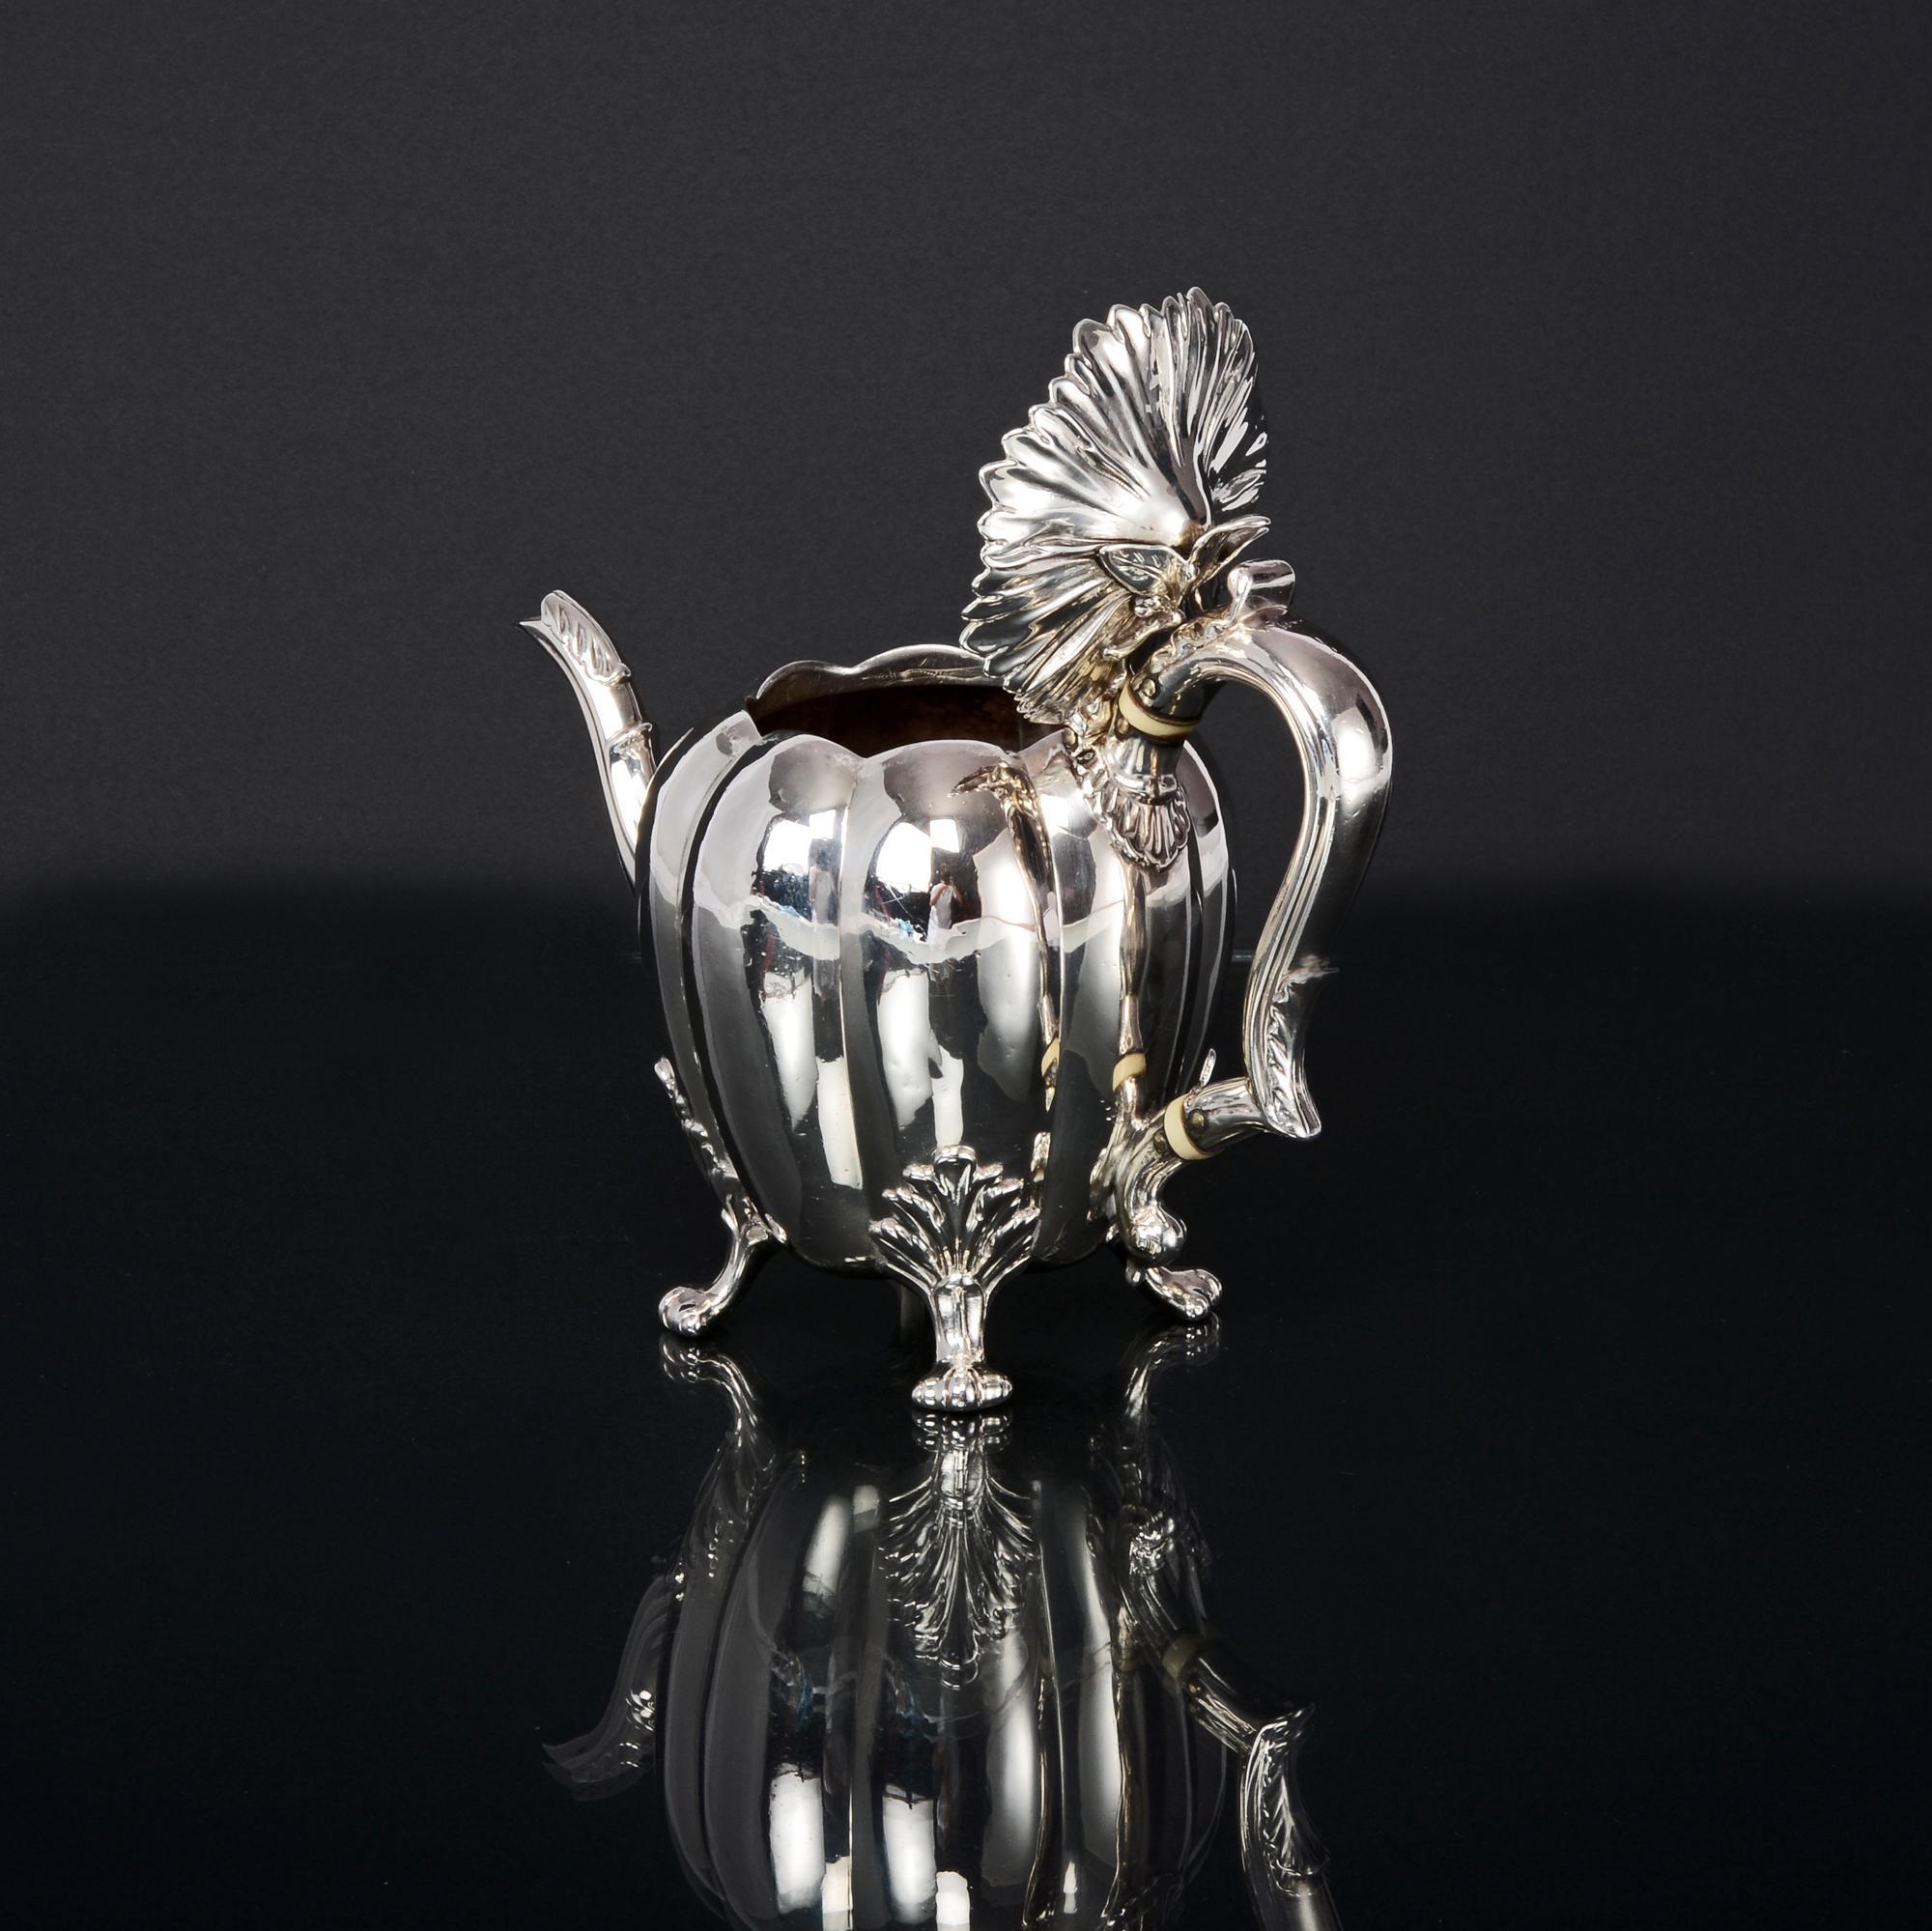 An unusual and decorative antique silver teapot in the form of a pumpkin or melon, with a moulded leaf lid and cast finial. This wonderful silver teapot is mounted on four cast leaf and scroll feet and has an insulated silver handle. It is a